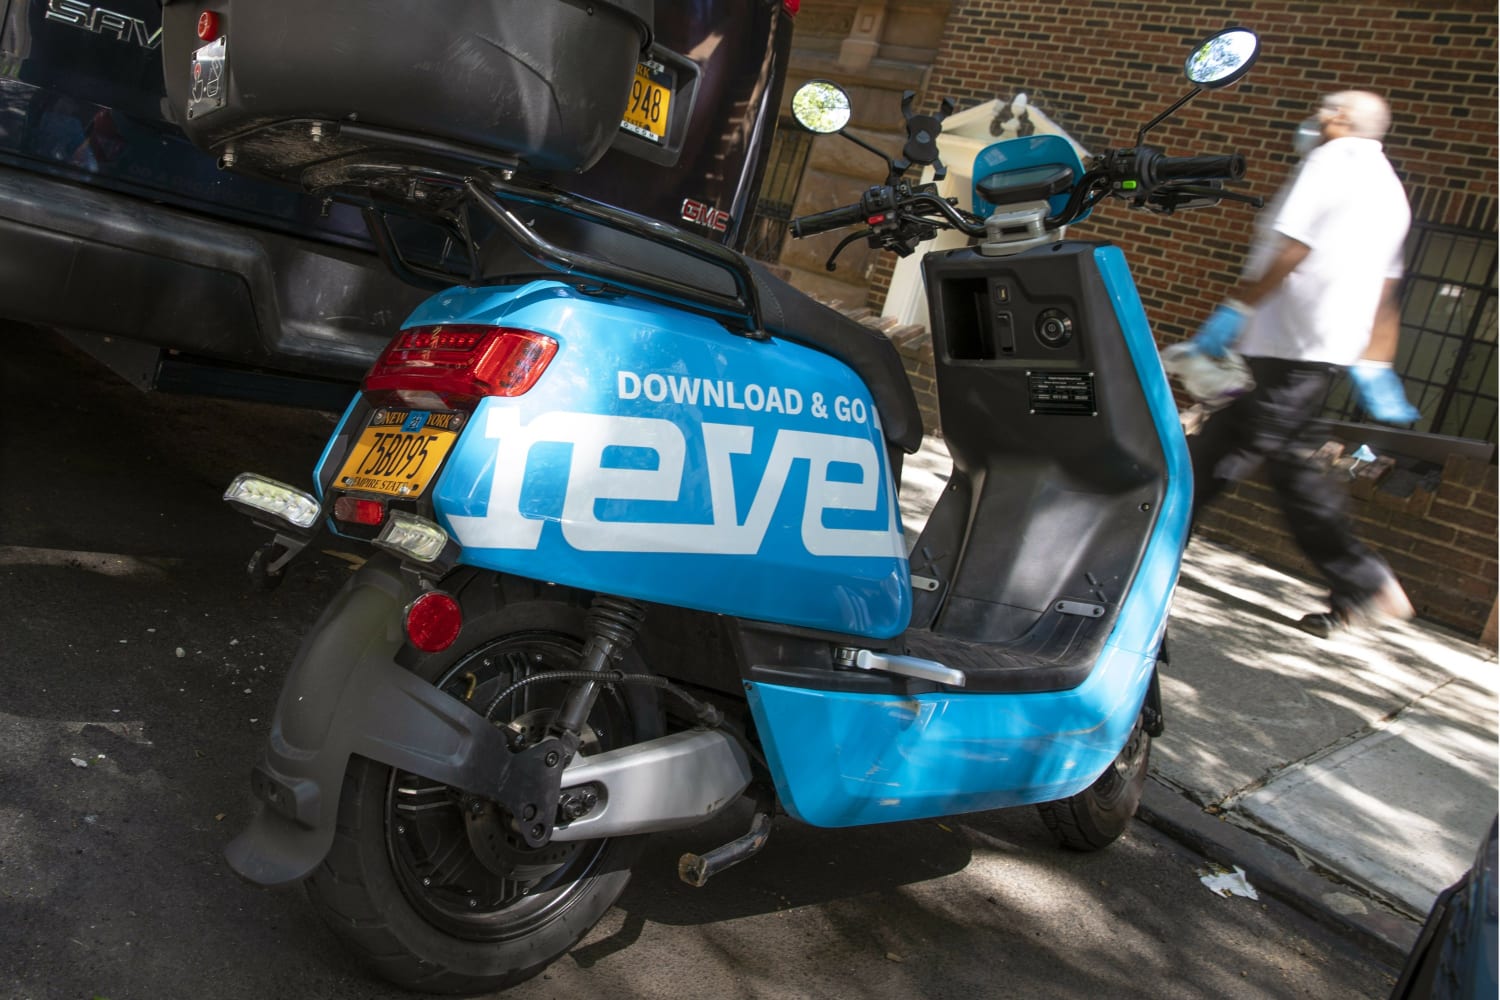 Man, 30, becomes 3rd Revel scooter fatality in New York City